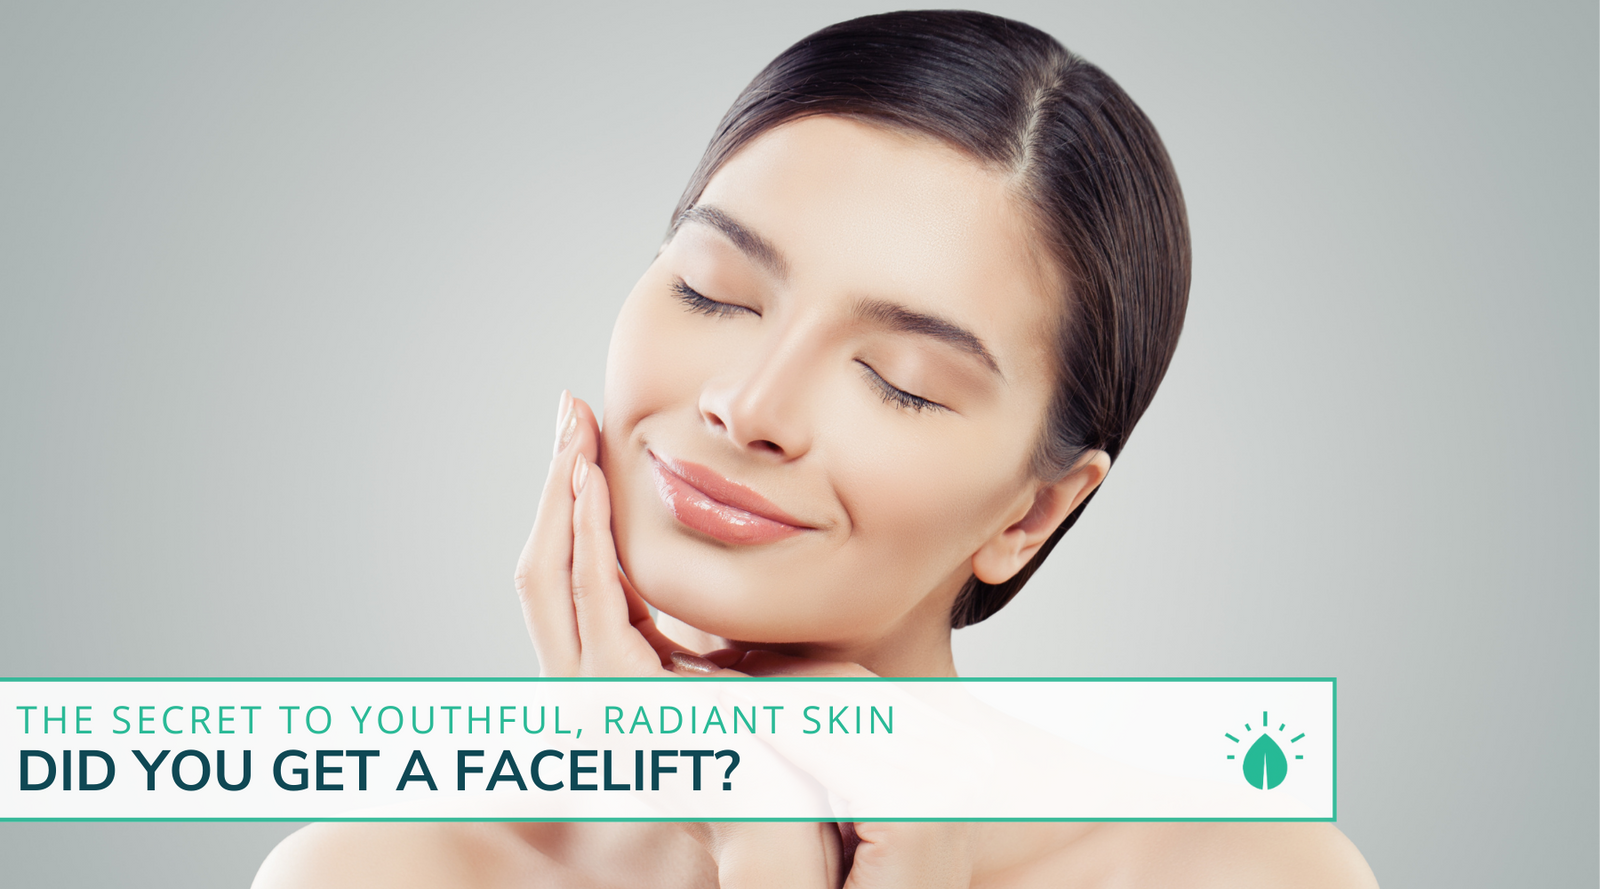 Did You Get a Facelift? The Secret To Radiant, Youthful Skin